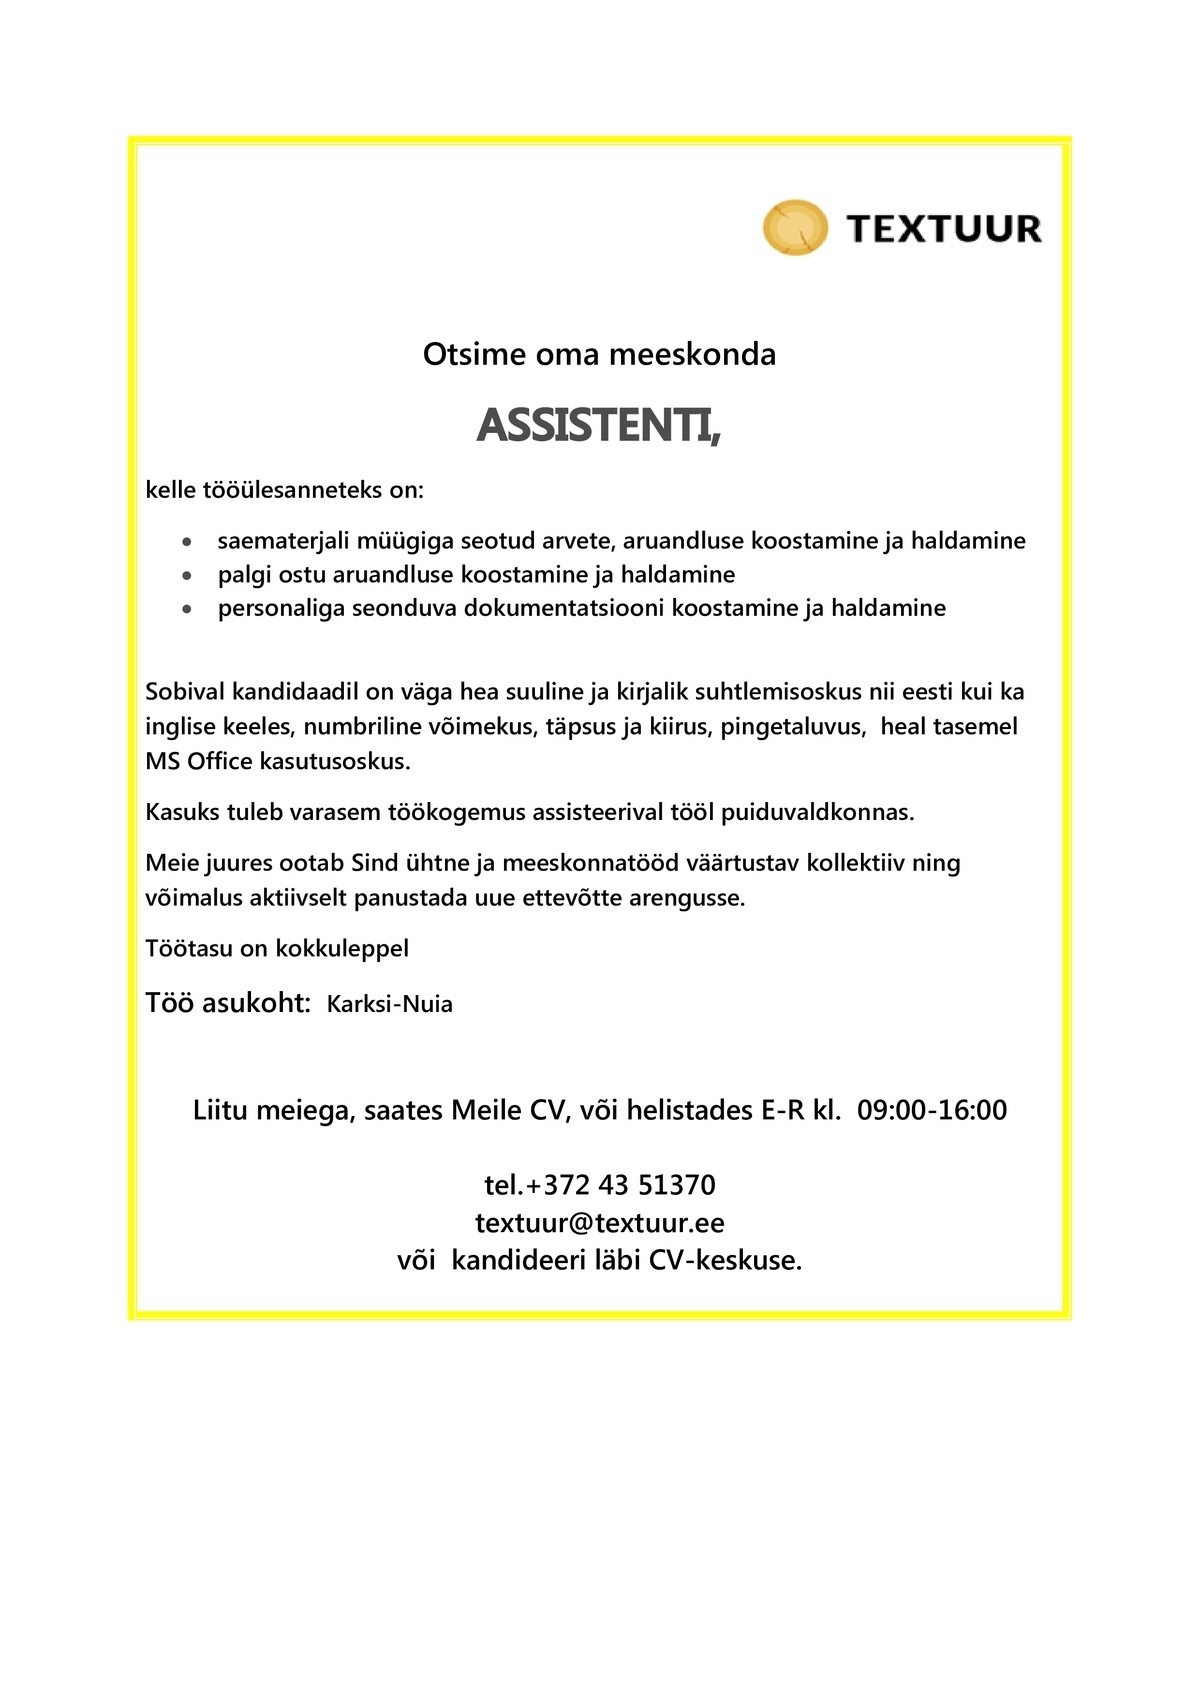 TEXTUUR AS Assistent